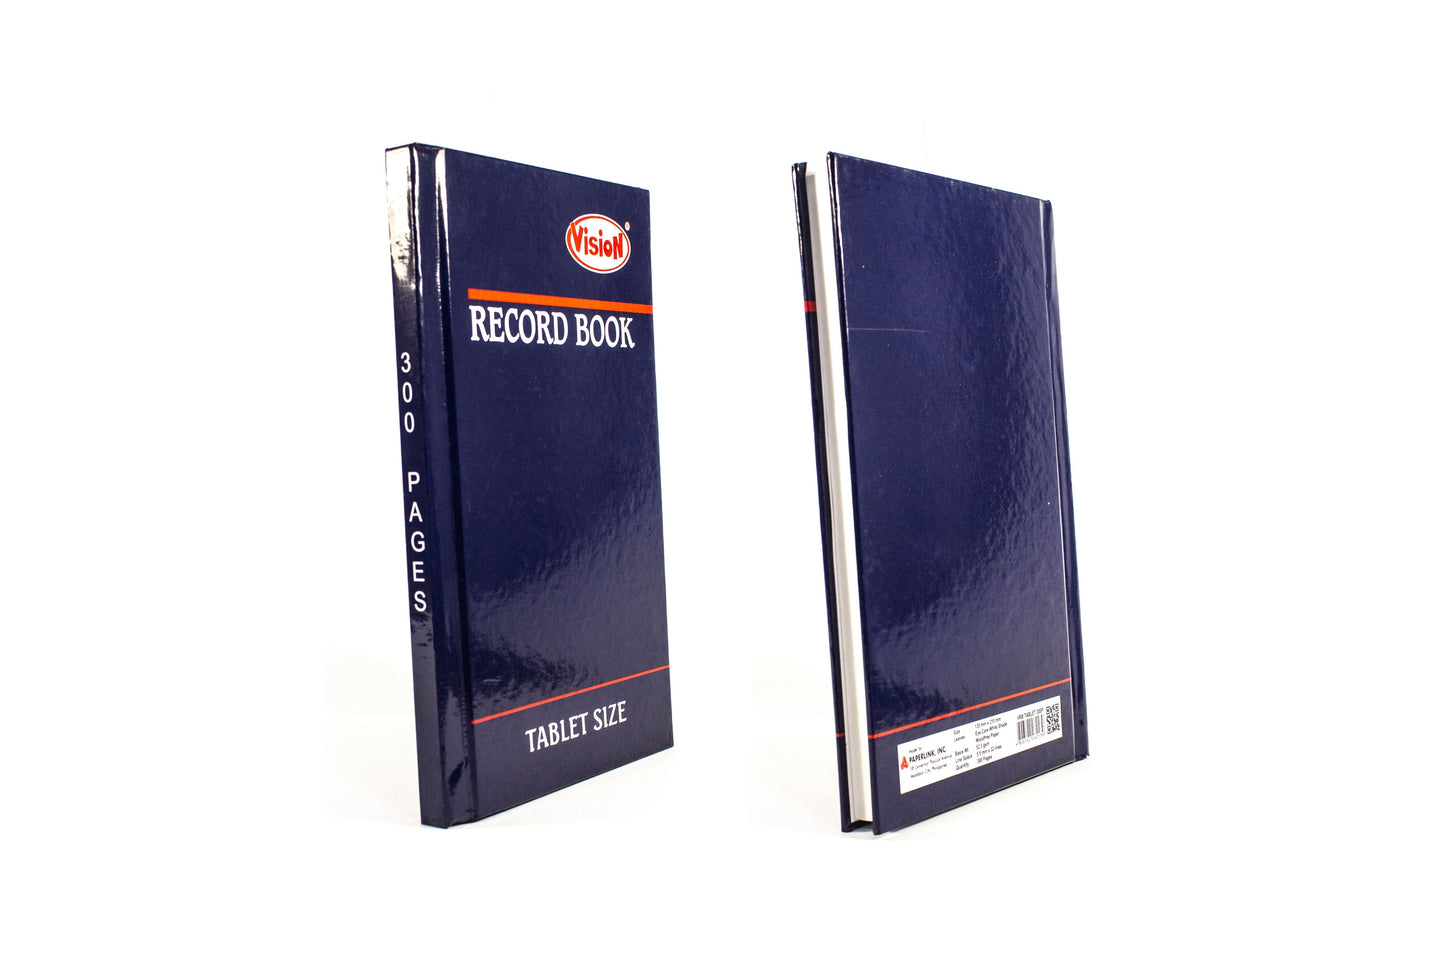 Vision Record Book Tablet Size